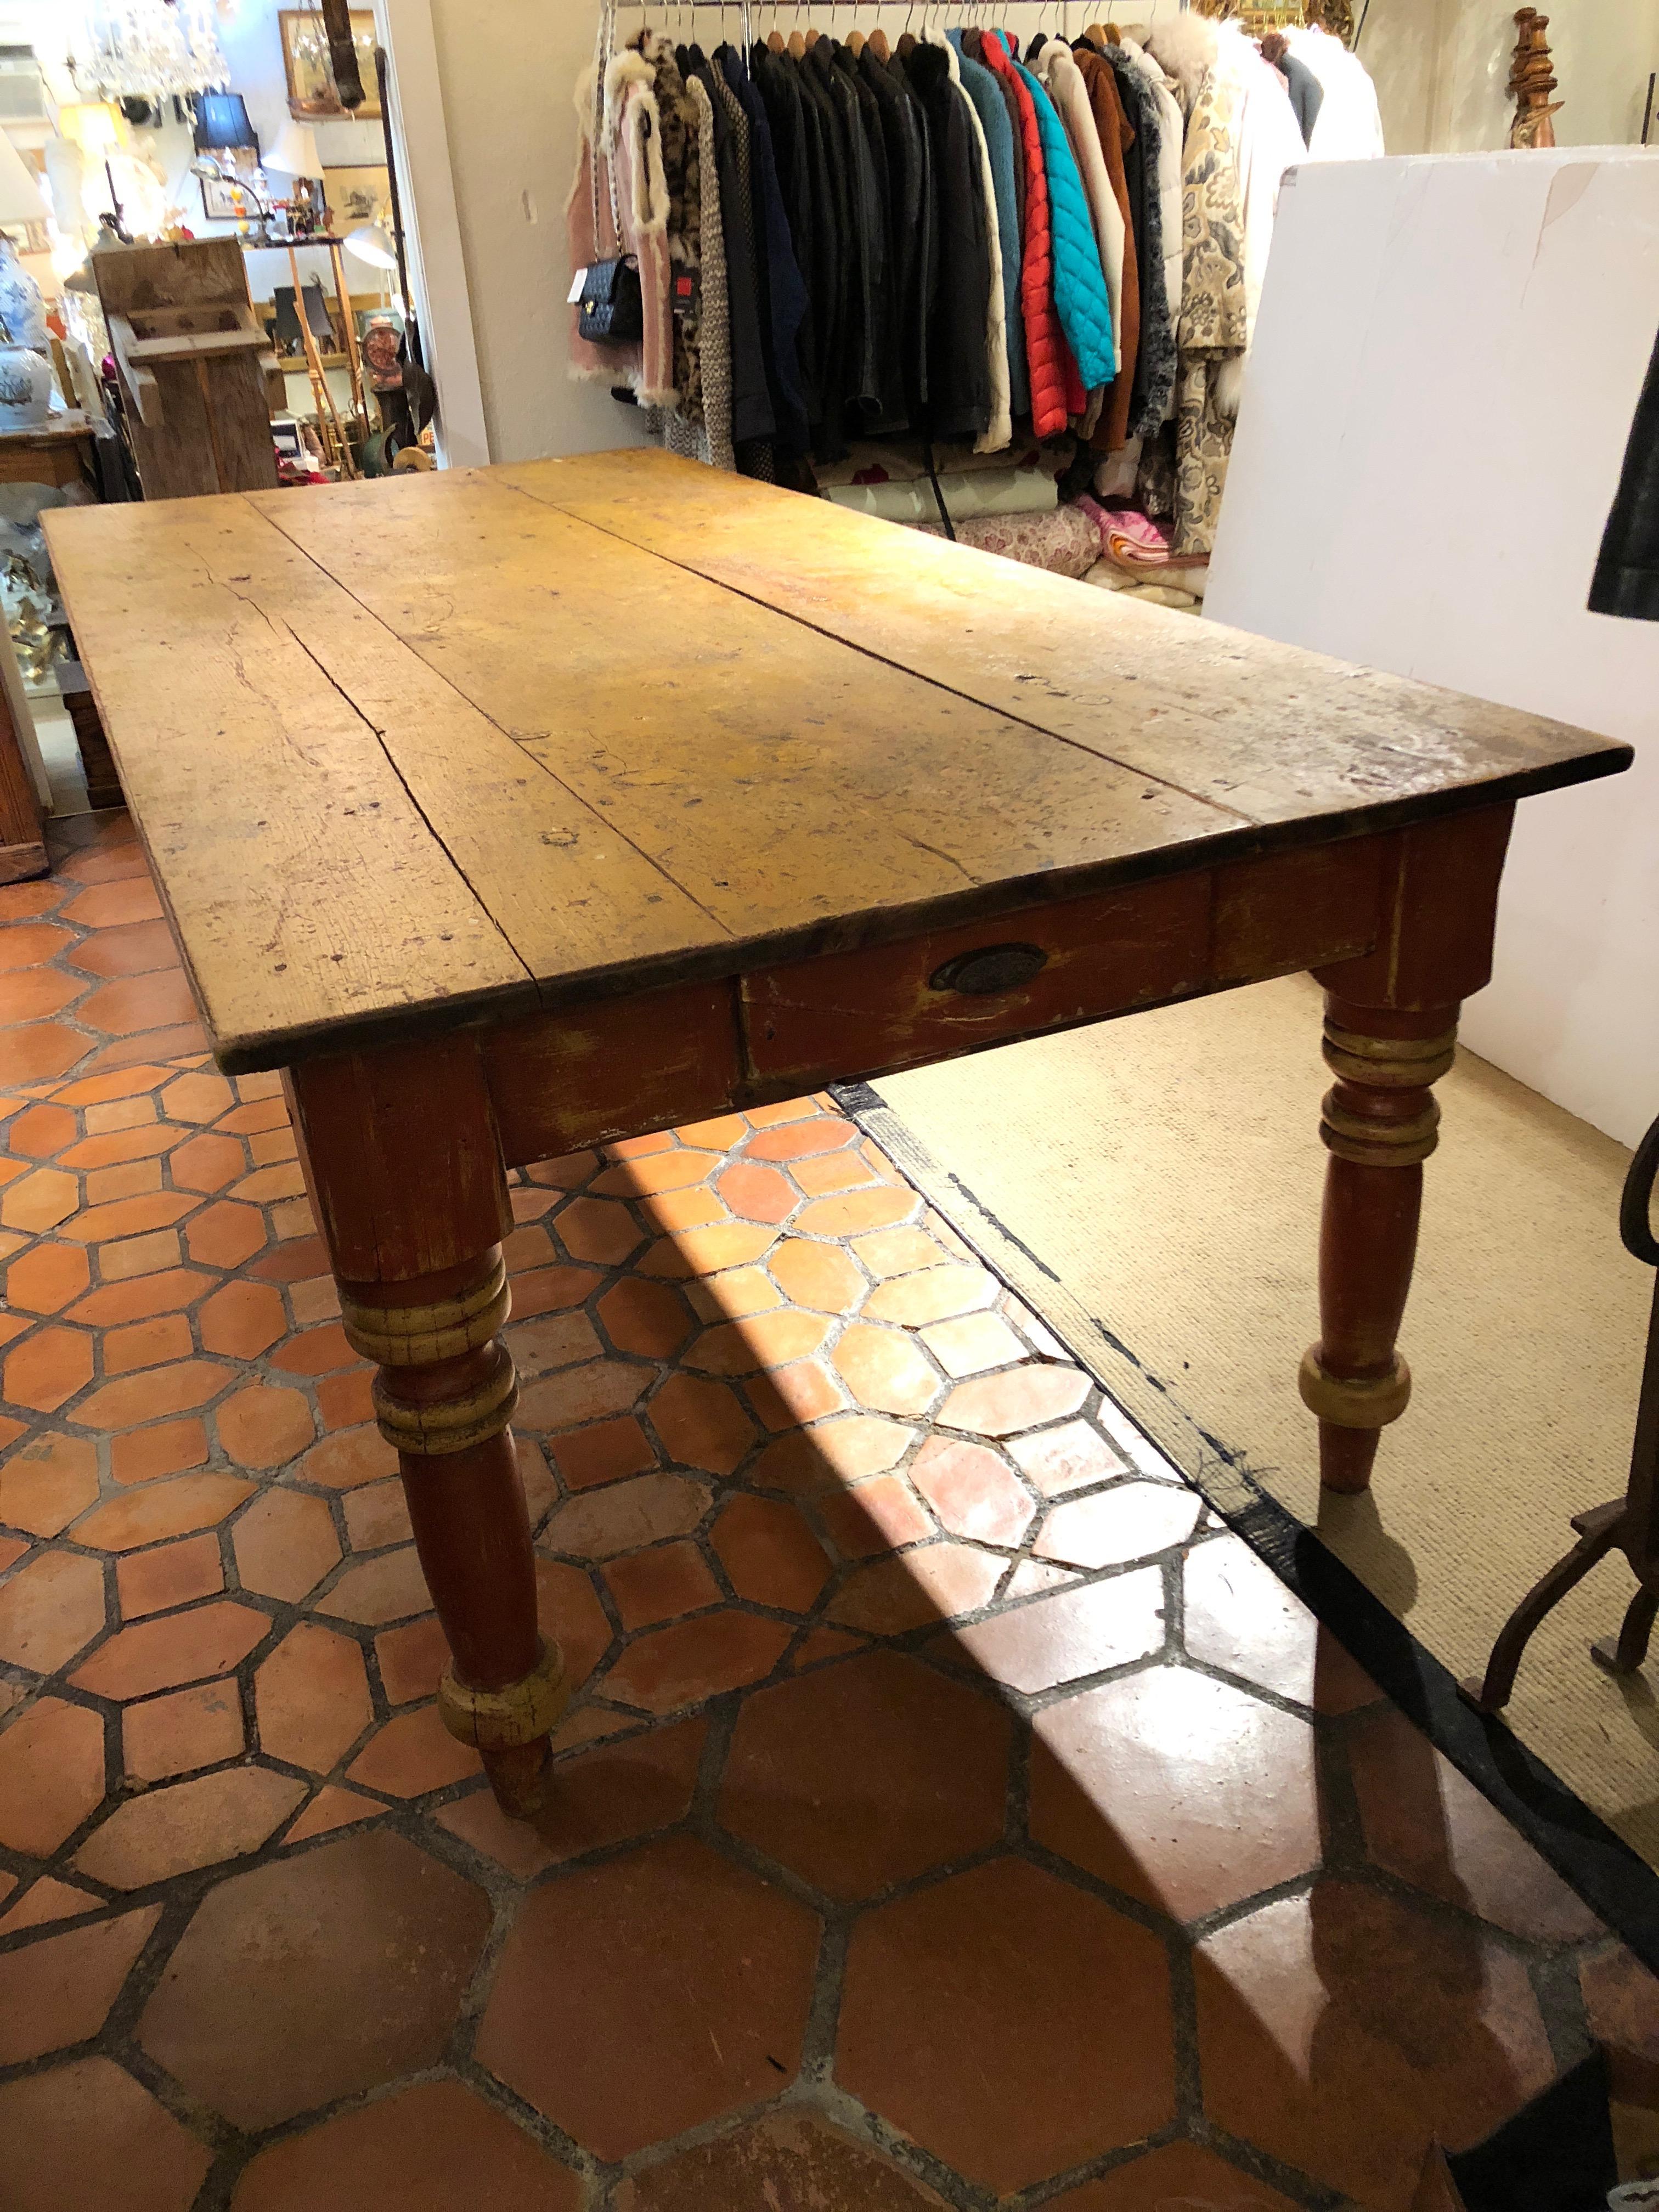 Amazing one of a kind antique Maine farm table, very large at almost 8 feet long, with gorgeous original paint and patina in warm tones of mustard, brown and red, having plank top and big turned legs as well as two drawers at each end. Apron height